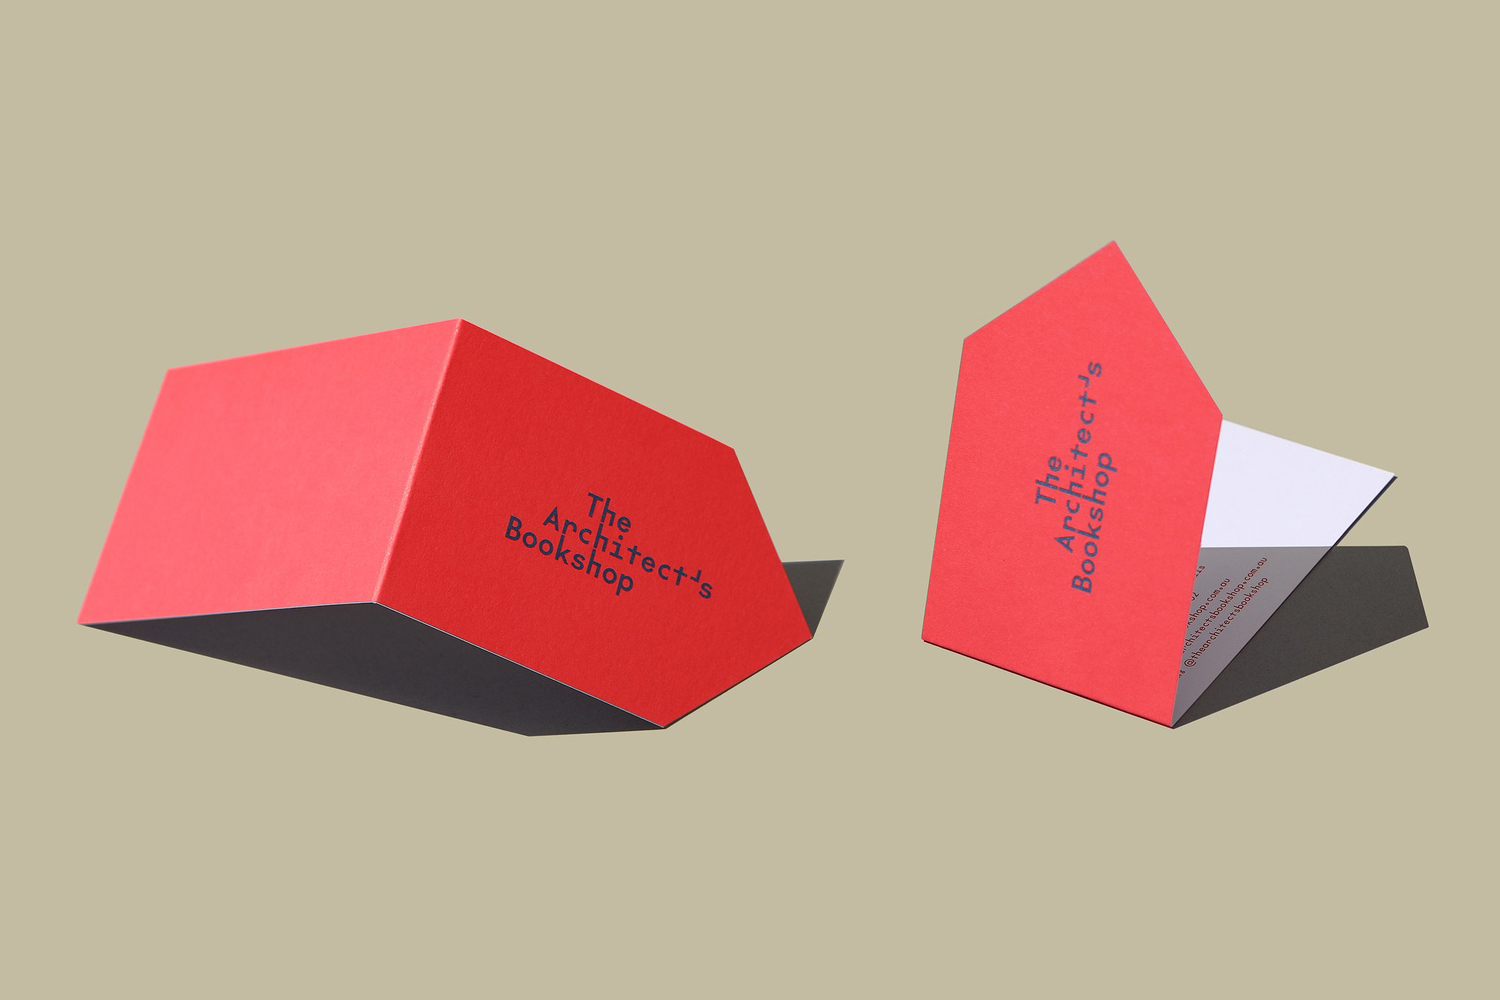 Architect-related Business Cards – The Architect's Bookshop by Garbett